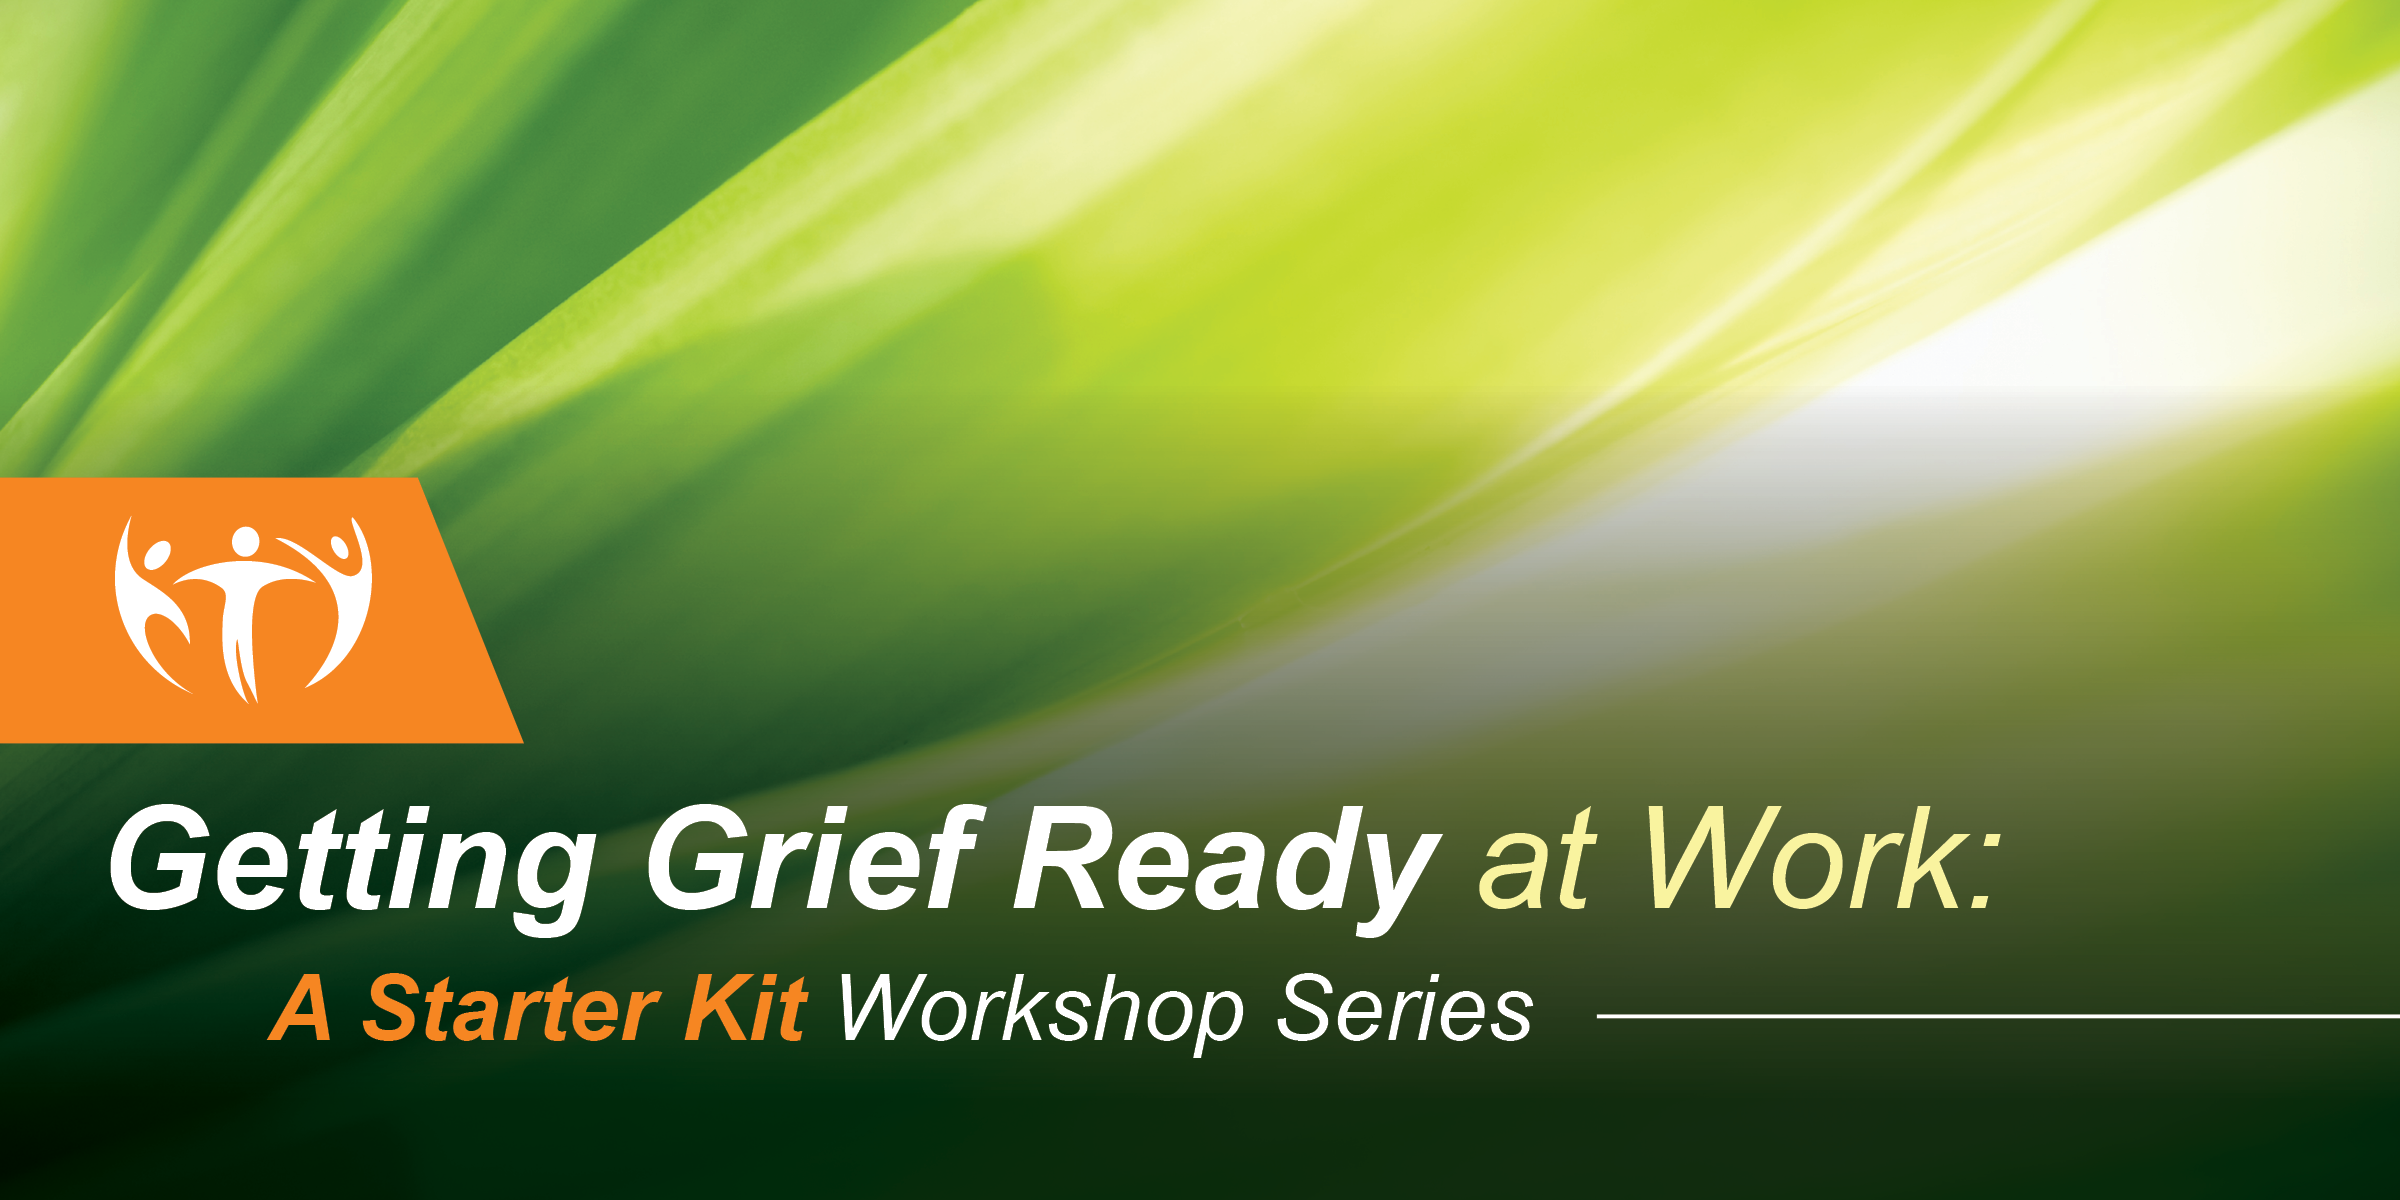 Getting Grief-Ready at Work: A Starter Kit Workshop Series